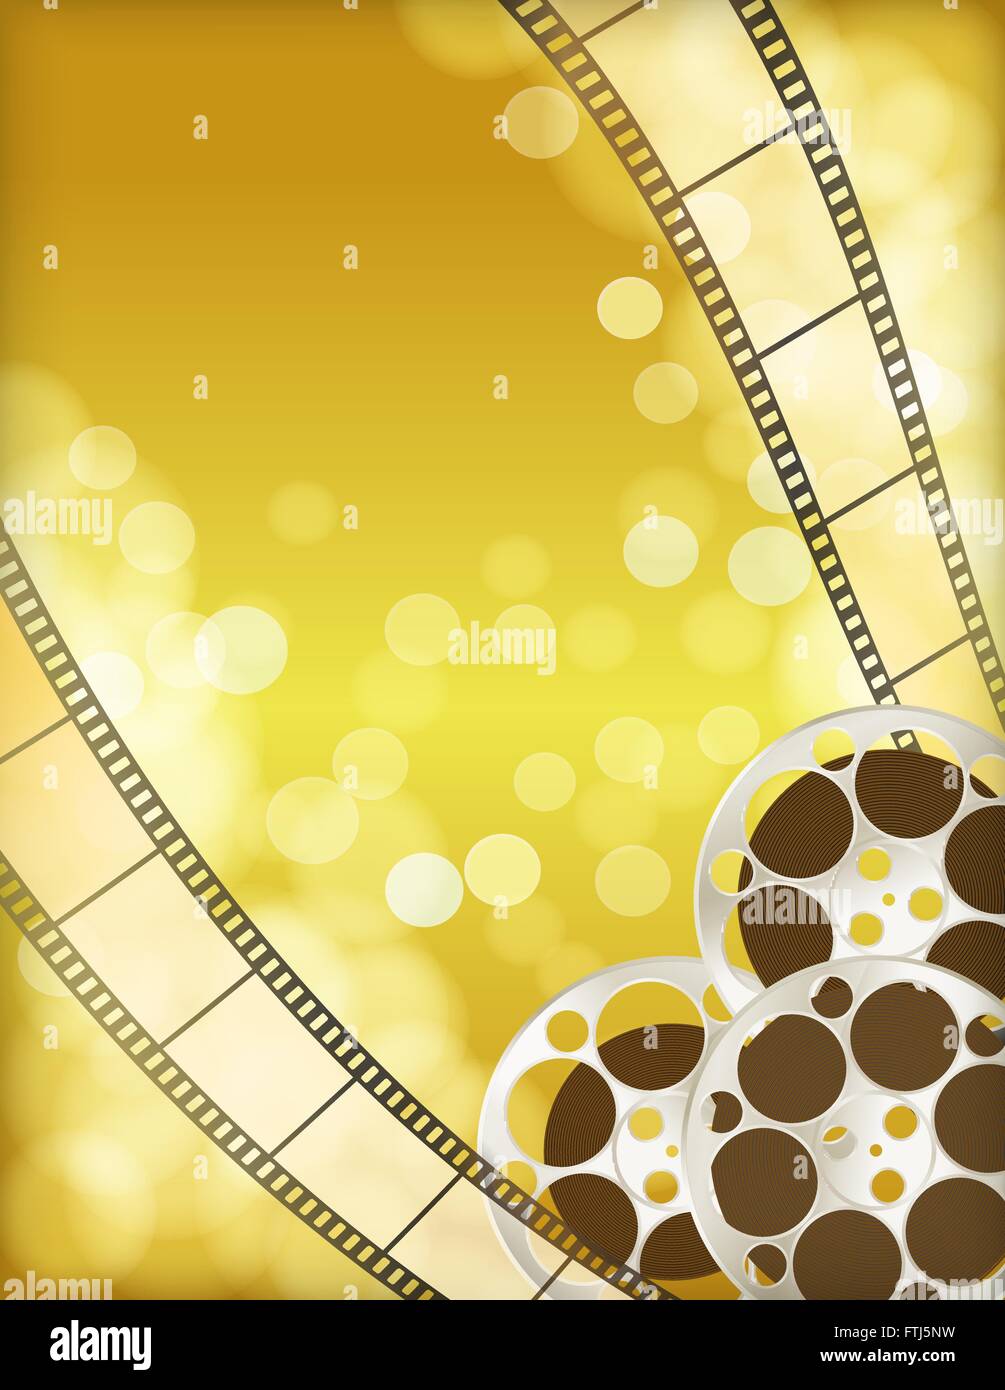 cinema golden background with retro filmstrip, film reel. vintage movie abstract background. vector Stock Vector